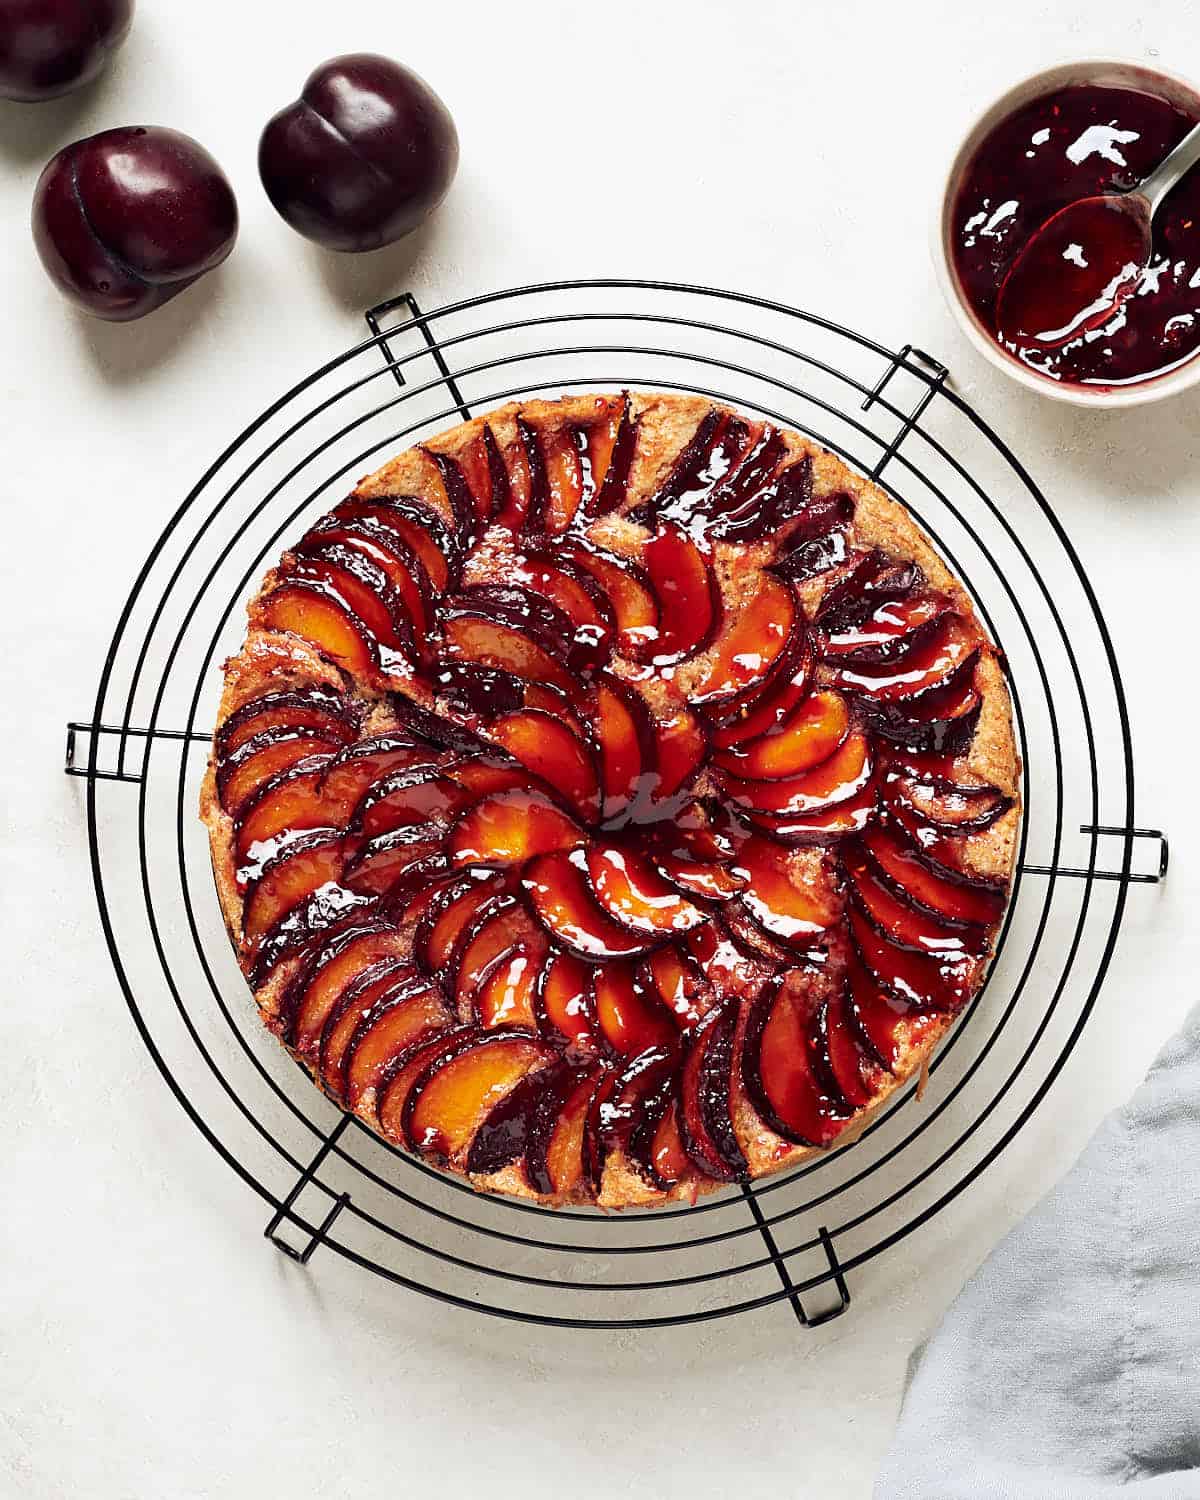 Overhead view of plum almond cake on black cake rack on grey surface with grey napkin, preserves, and plums.